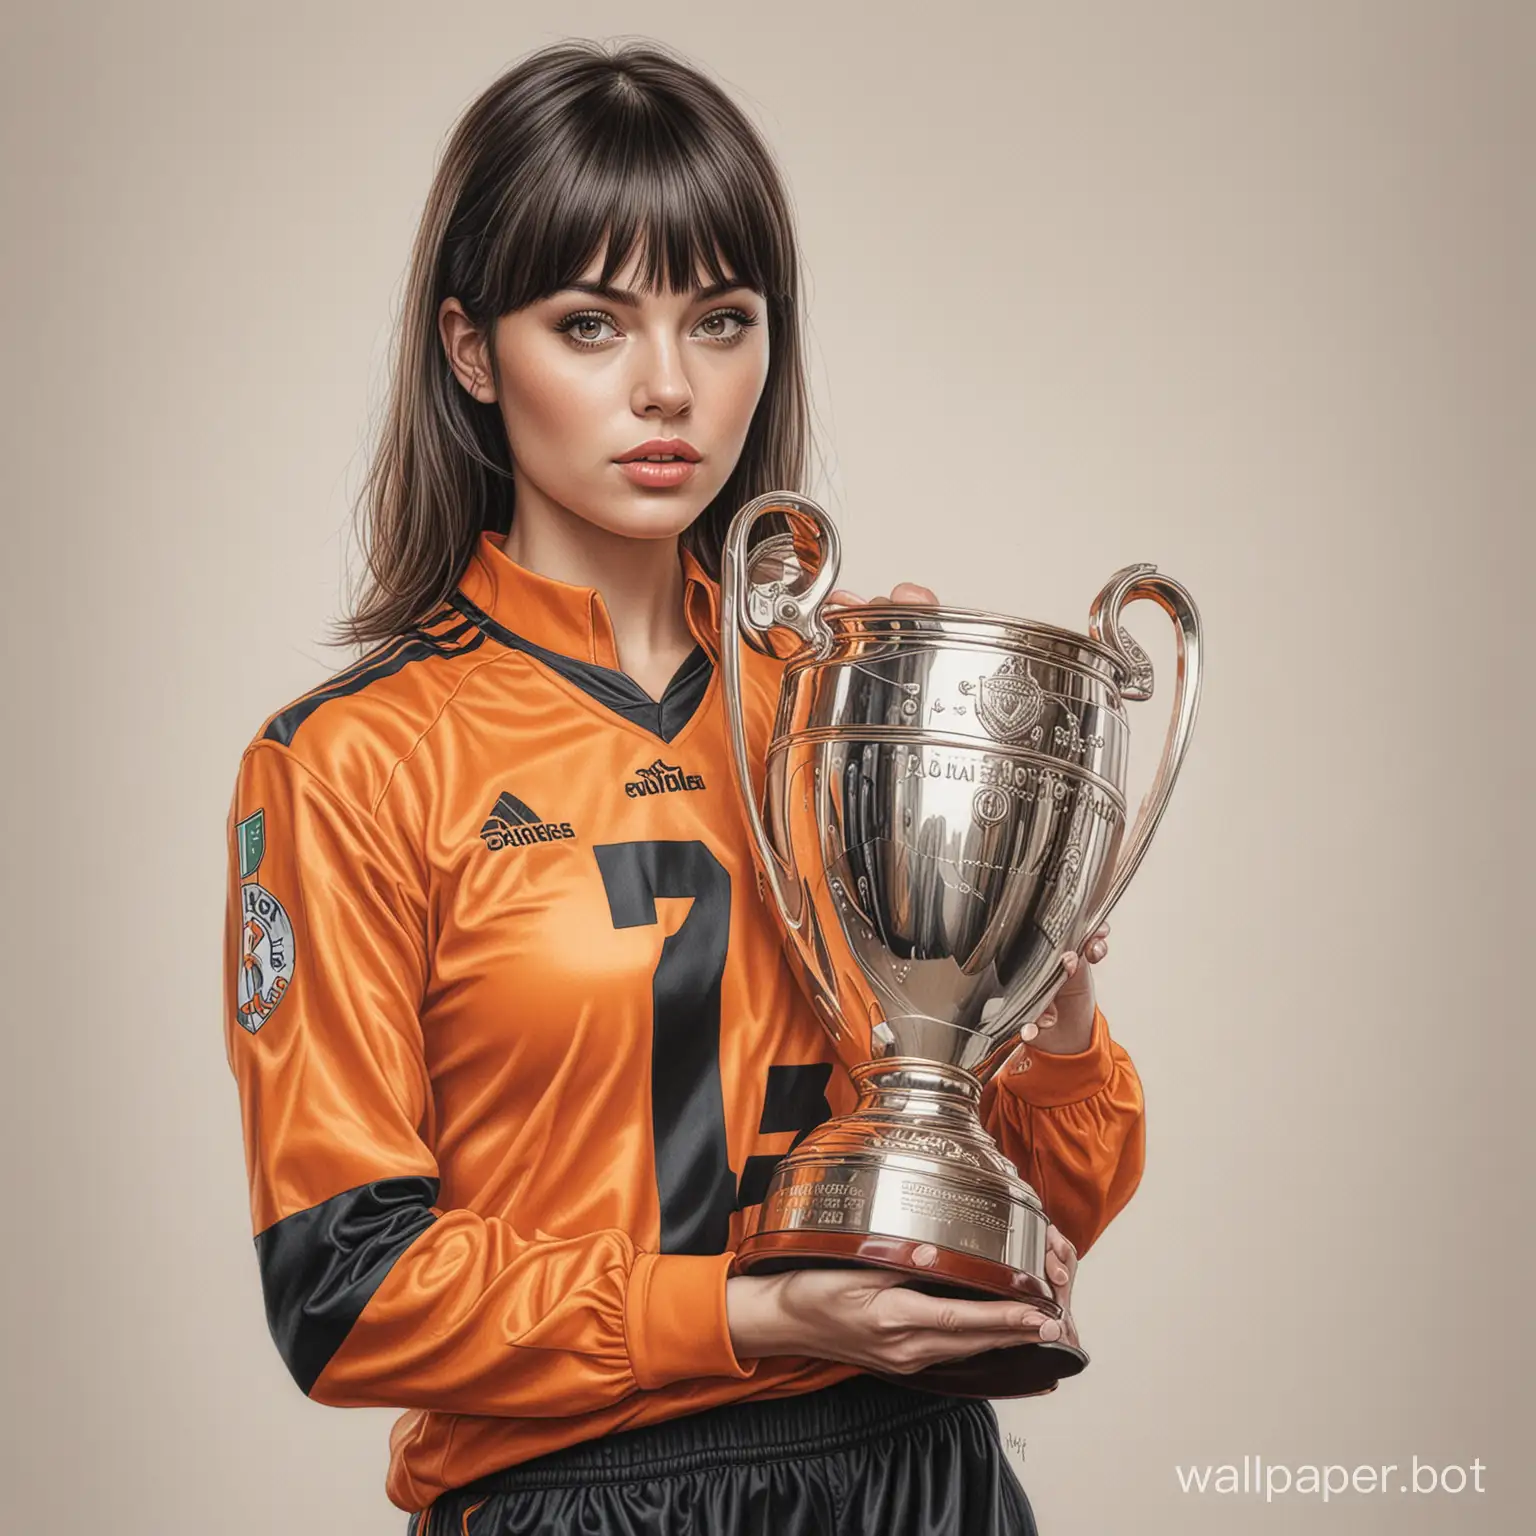 Sketch Alina Lanina 25 years old, dark short hair with bangs, cup size 7, narrow waist in orange and black football uniform, holding a large Champions Cup against a white background, highly realistic drawing in colored pencil